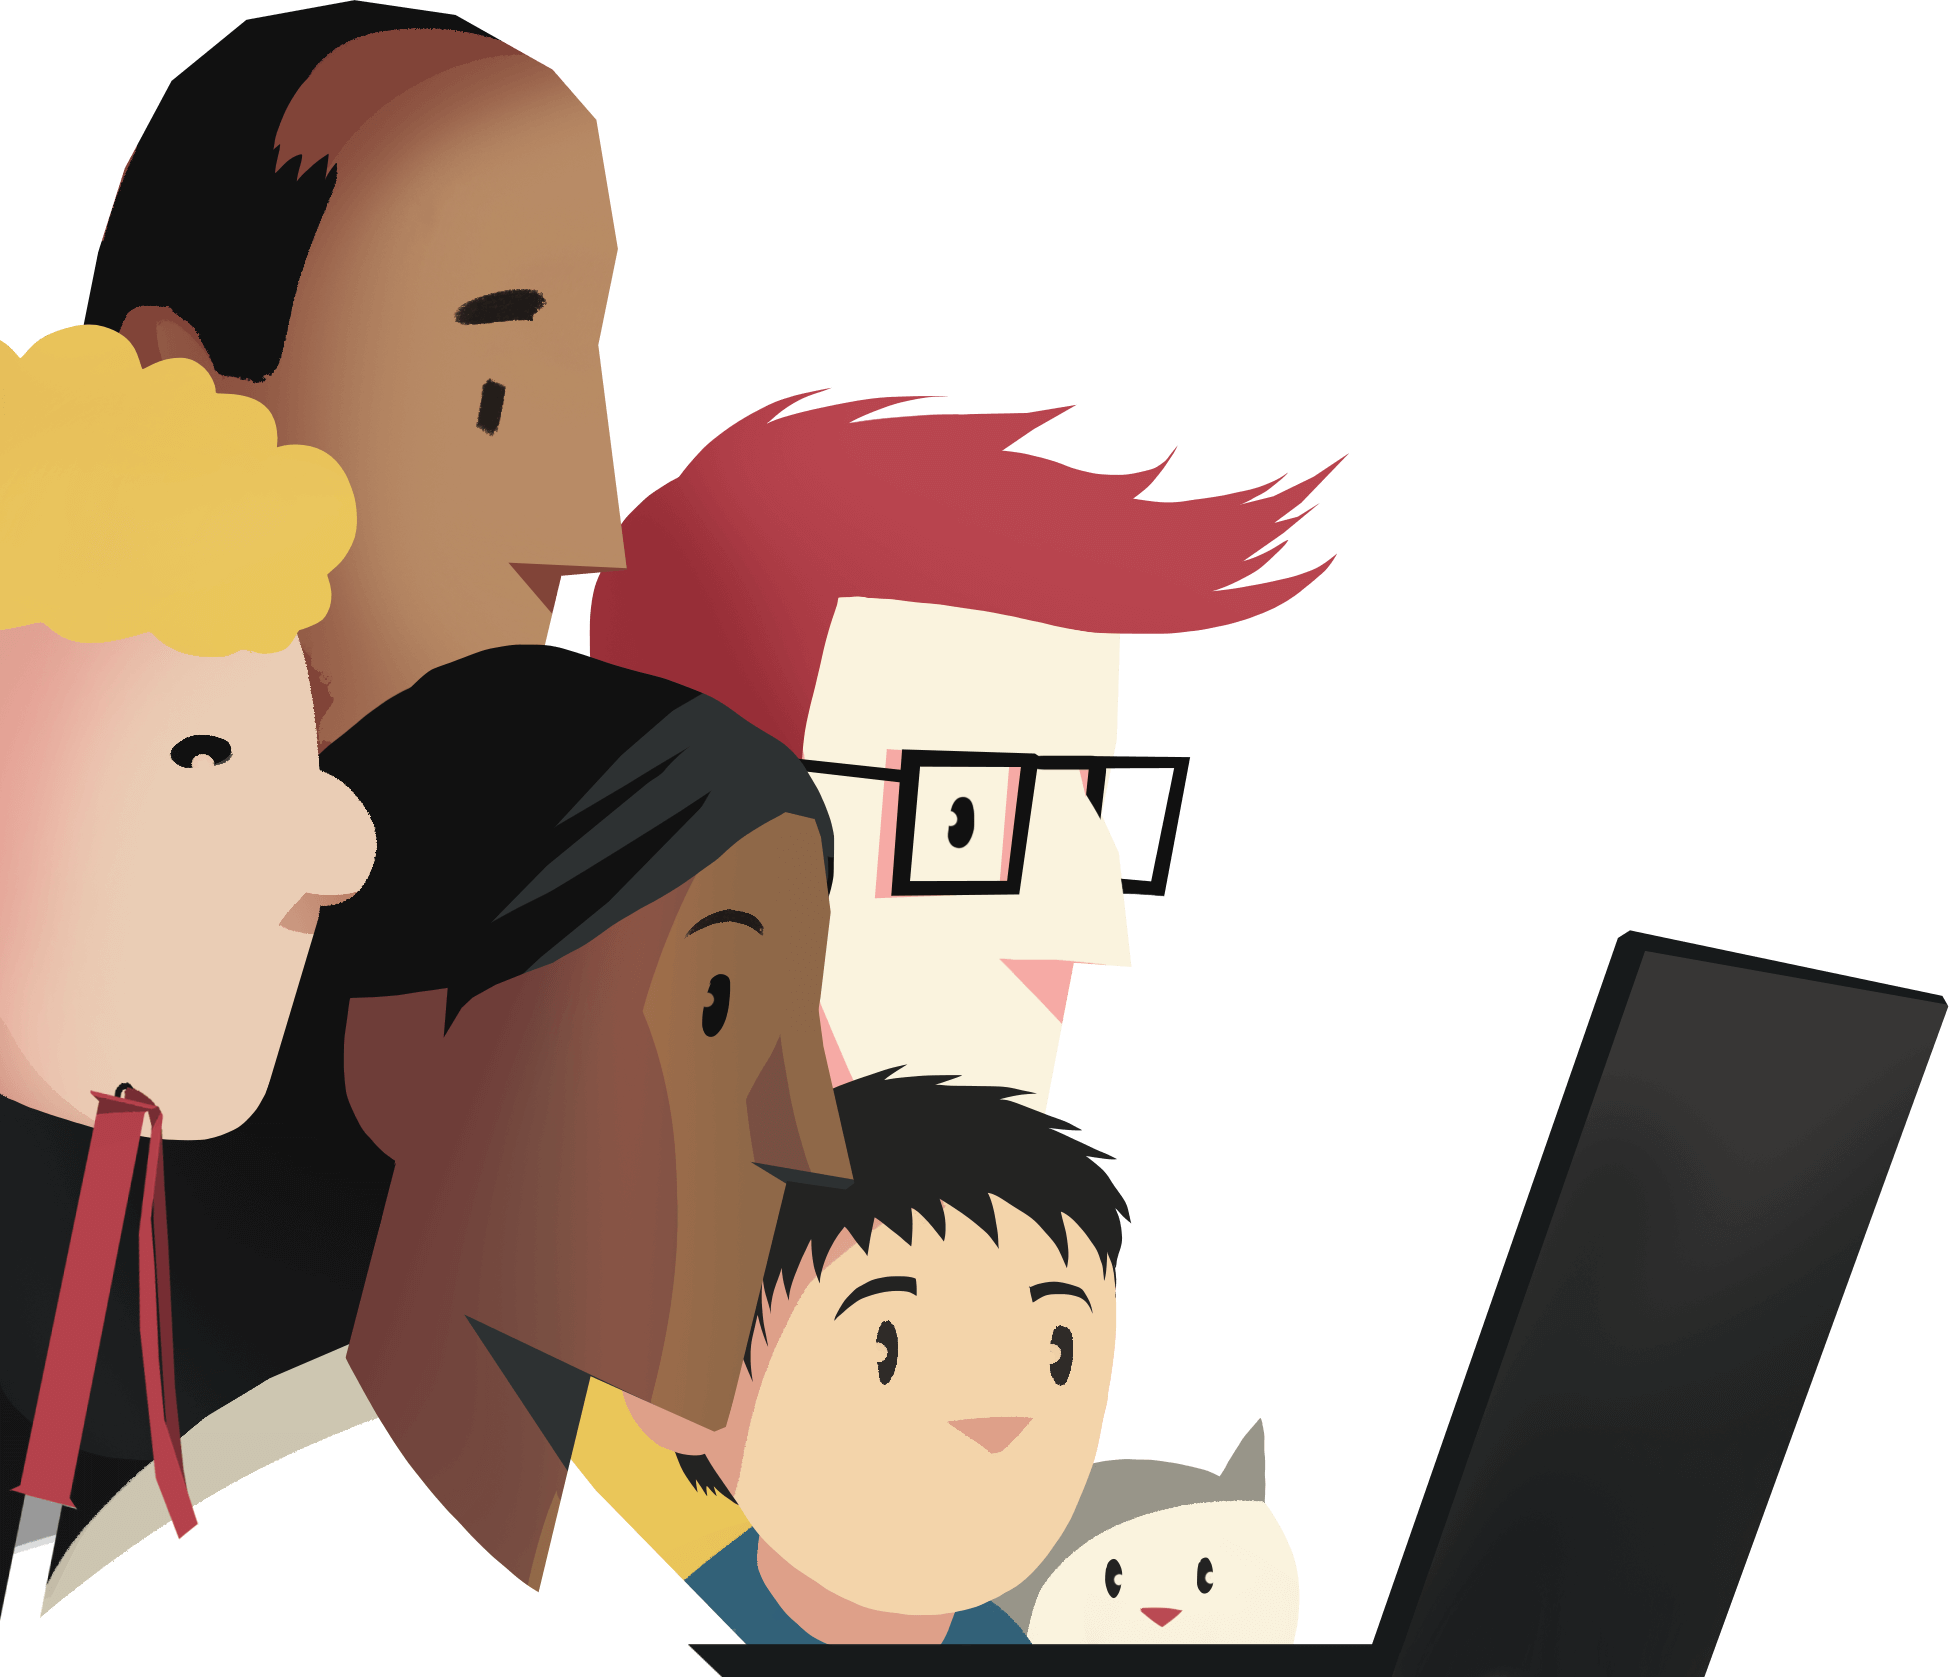 Illustration: Various users gathered in front of a computer screen.